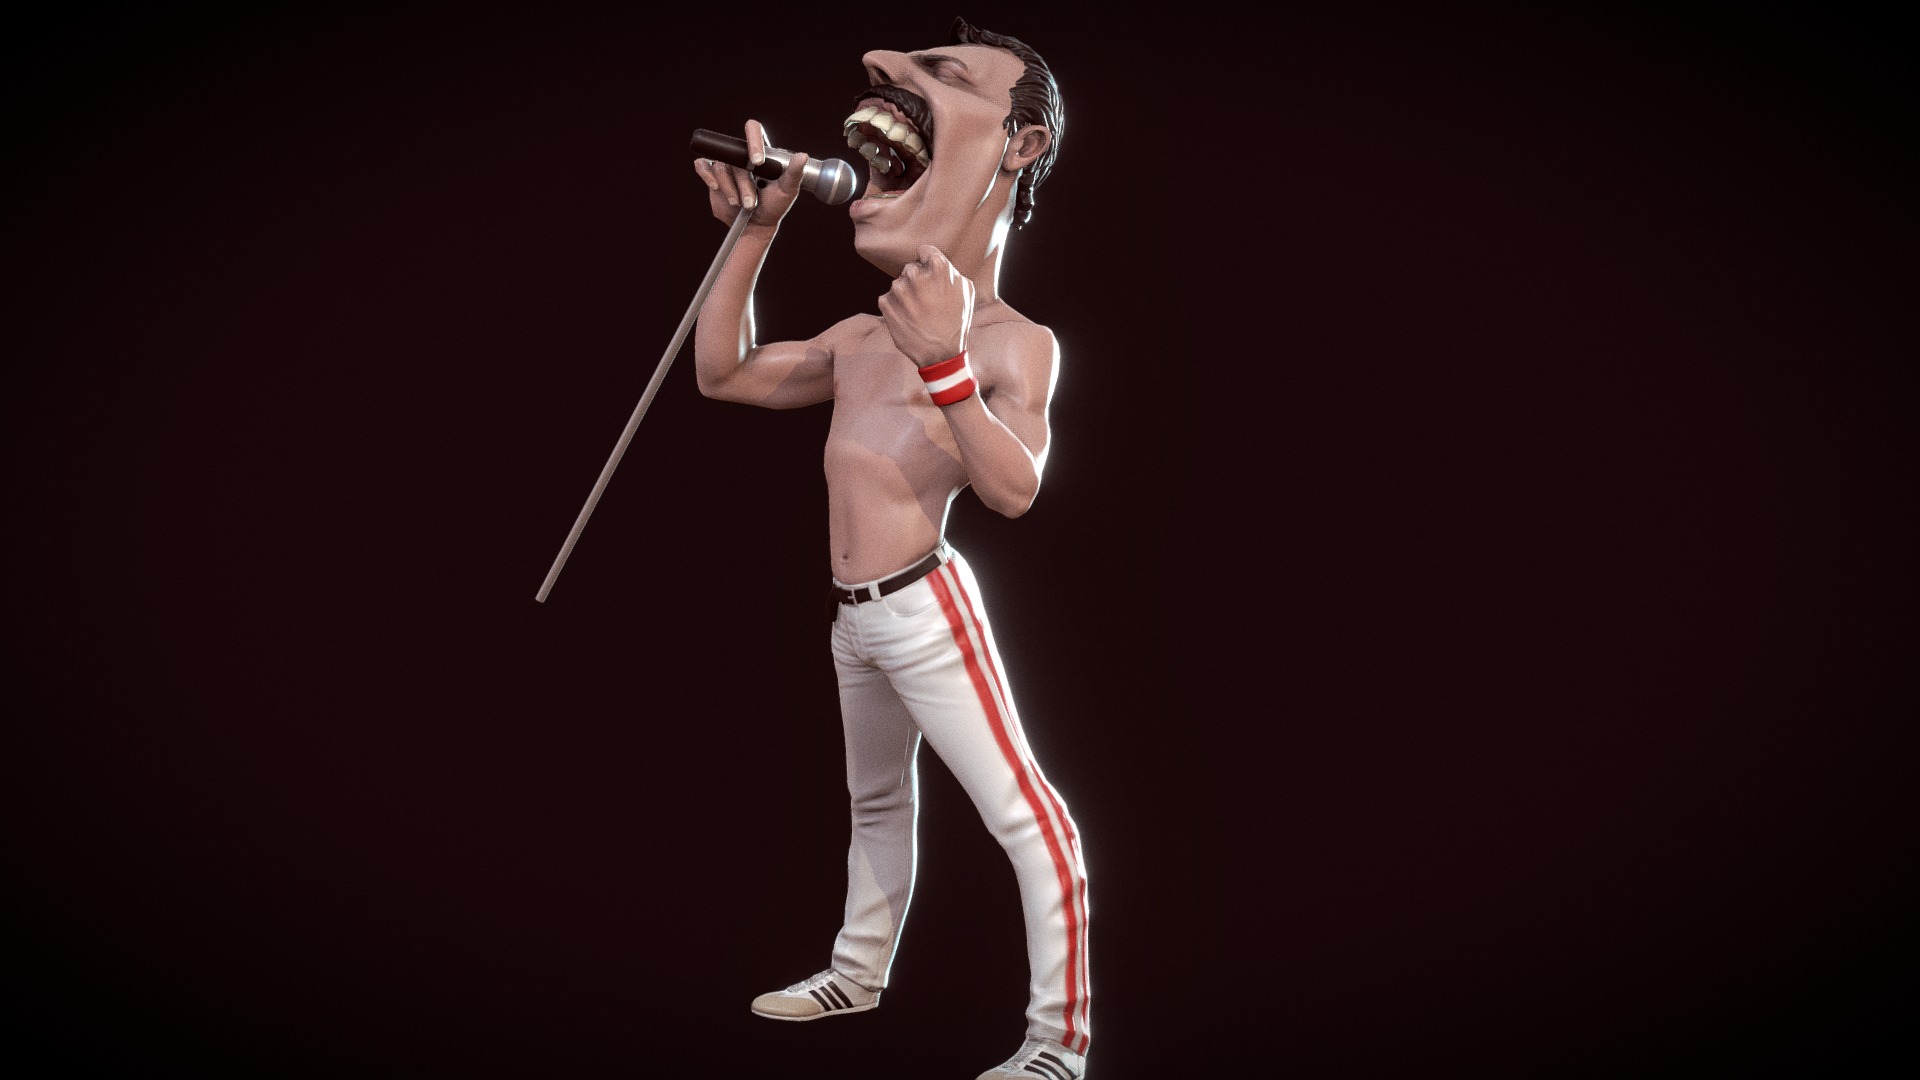 3D model Freddie low NO PRINT - This is a 3D model of the Freddie low NO PRINT. The 3D model is about a person singing into a microphone.